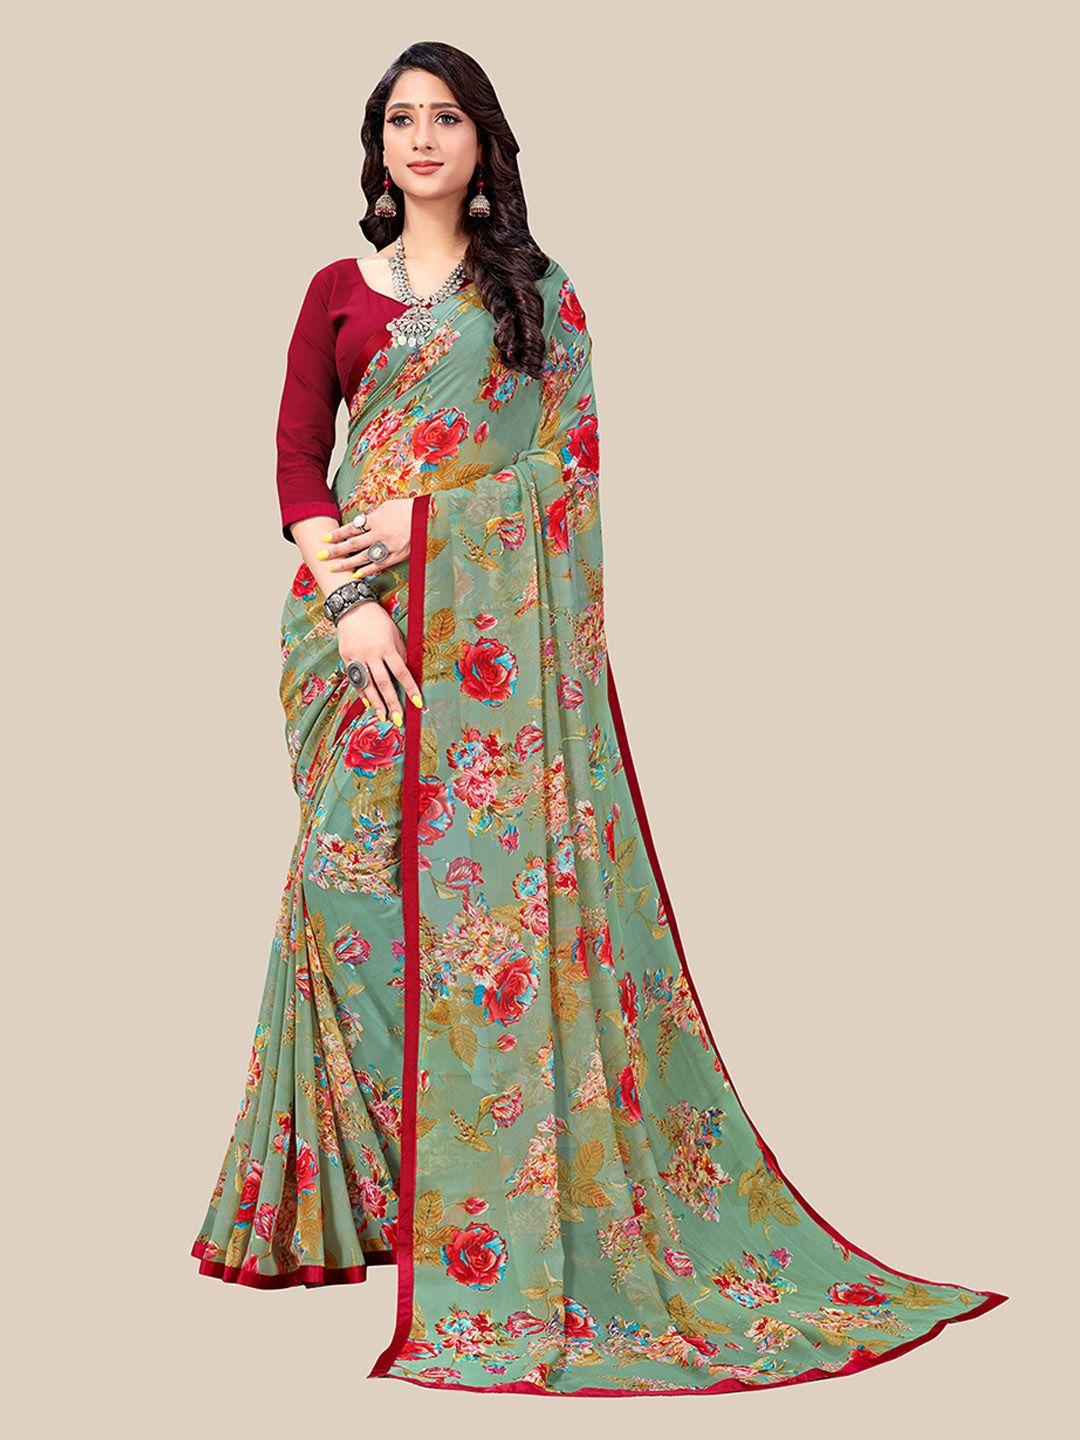 united liberty olive green & red floral pure georgette saree